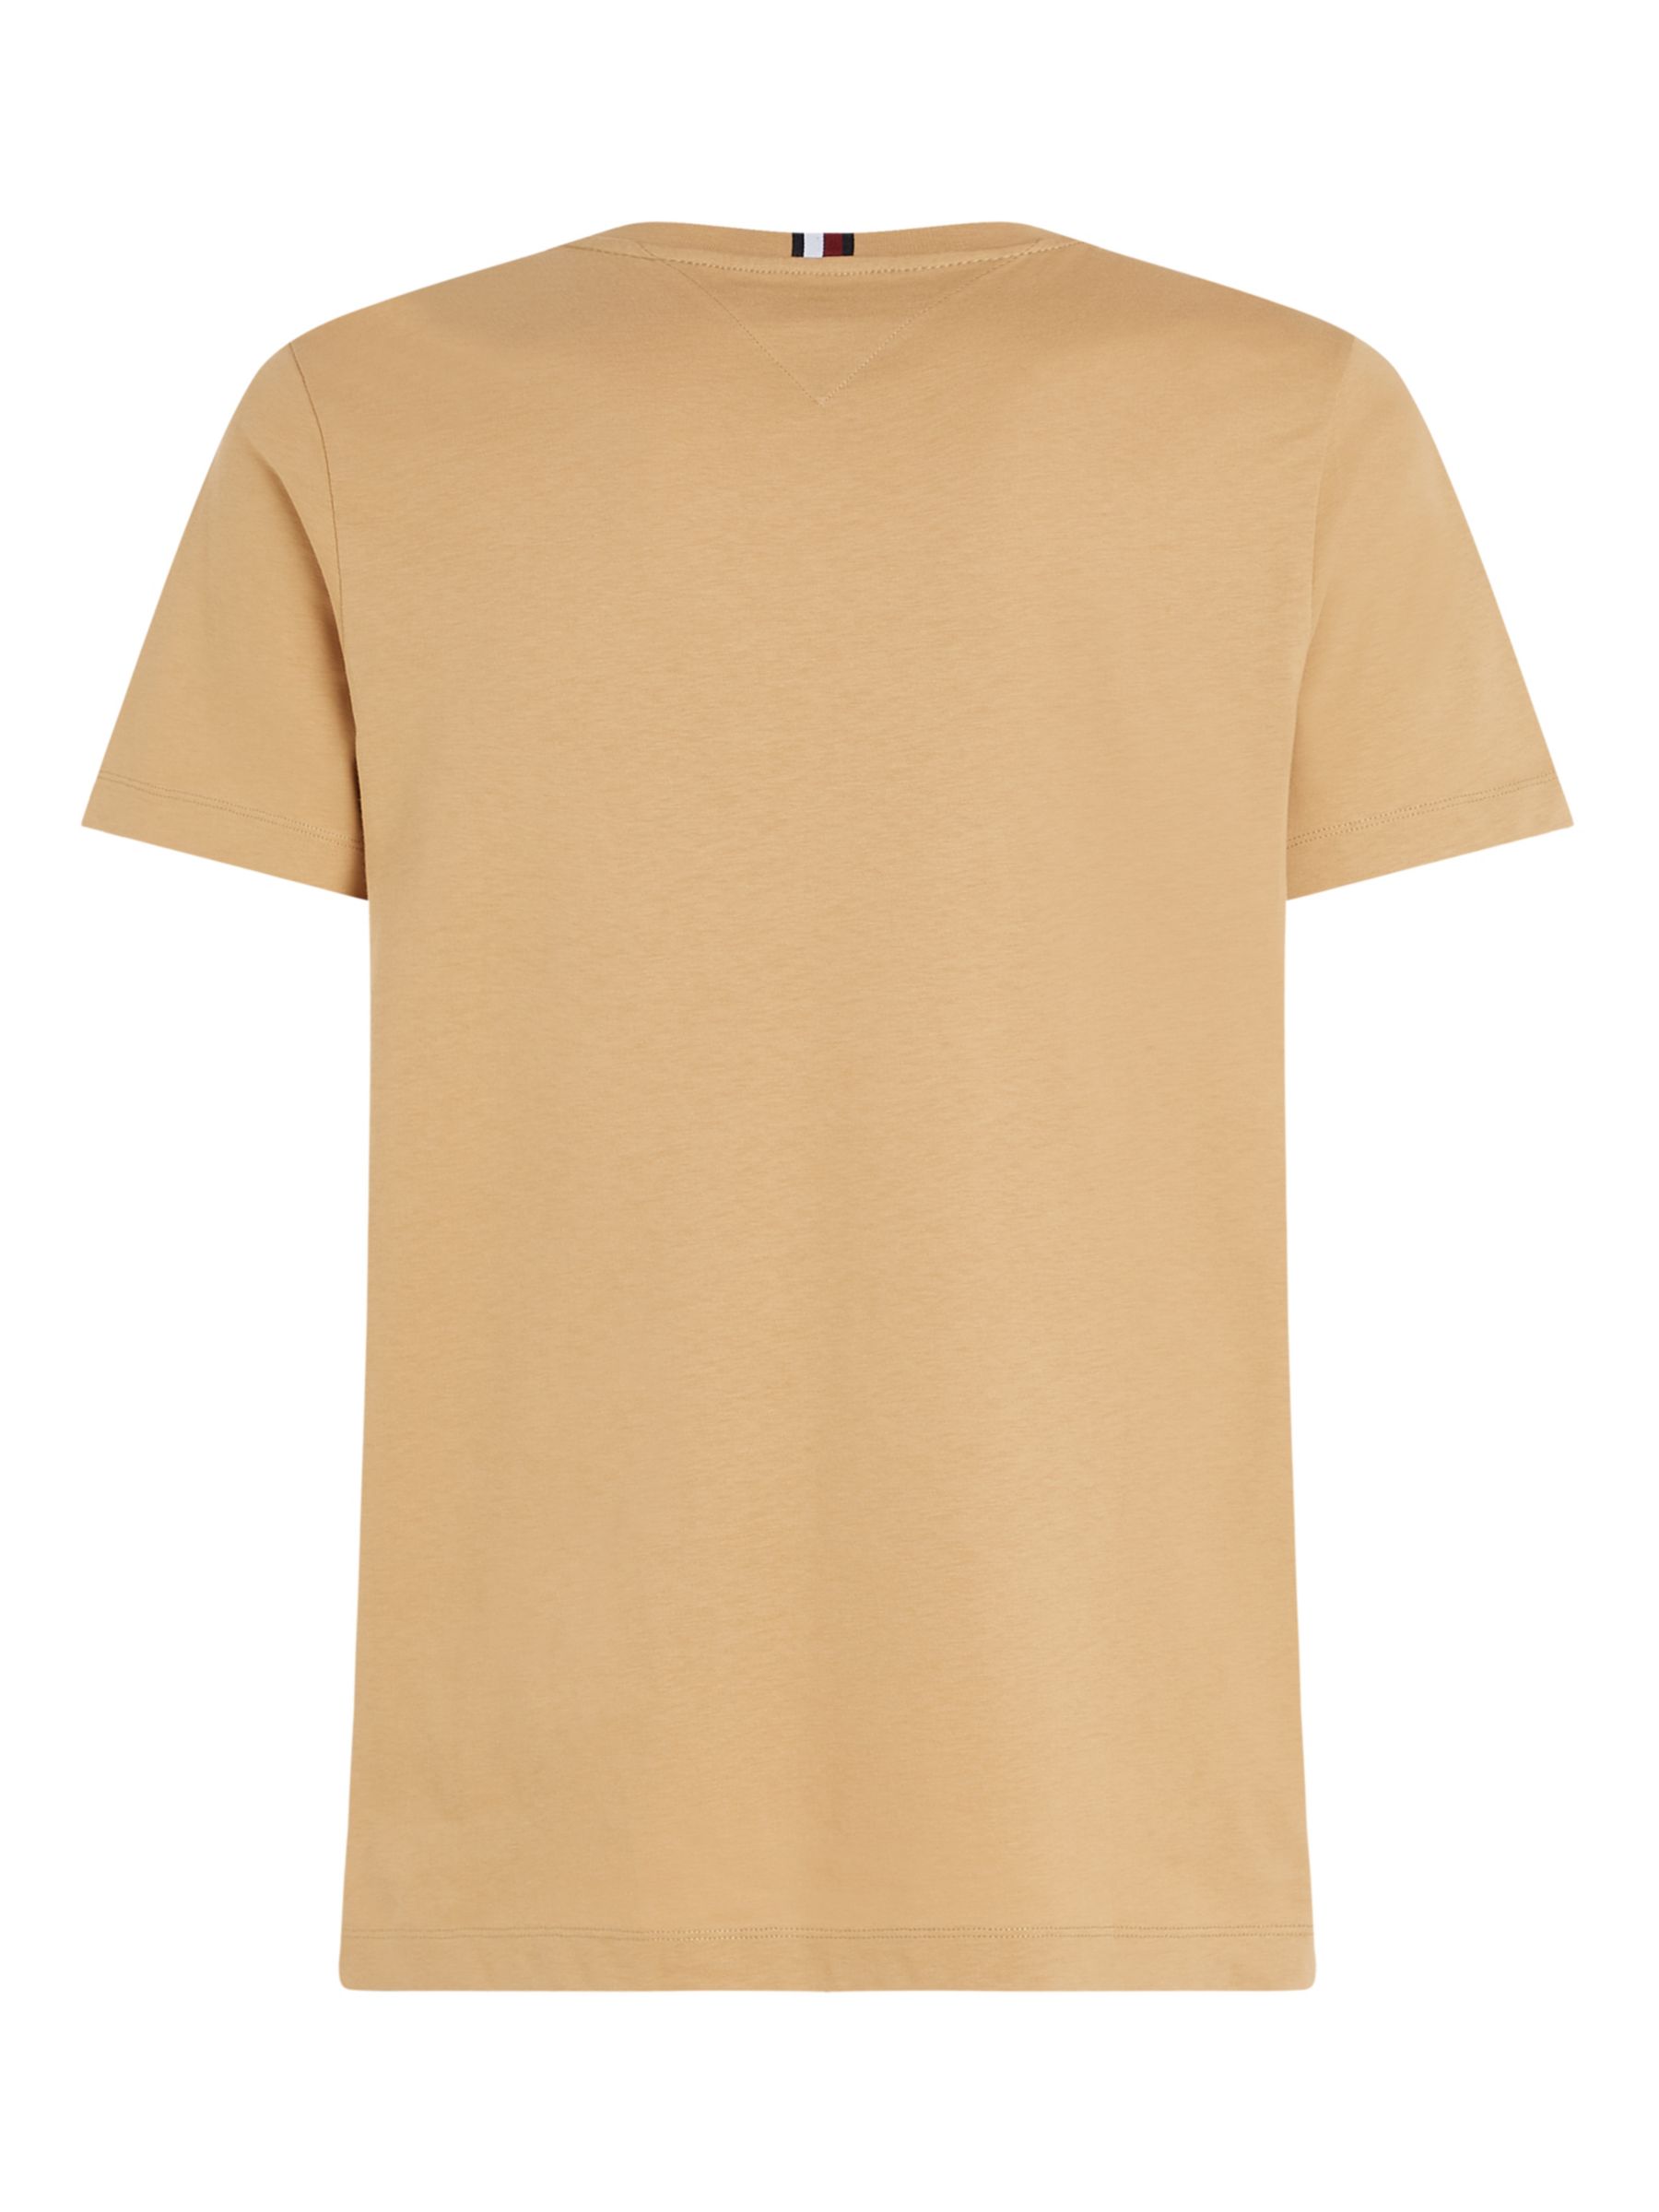 Buy Tommy Hilfiger Monotype Graphic T-Shirt, Classic Khaki Online at johnlewis.com